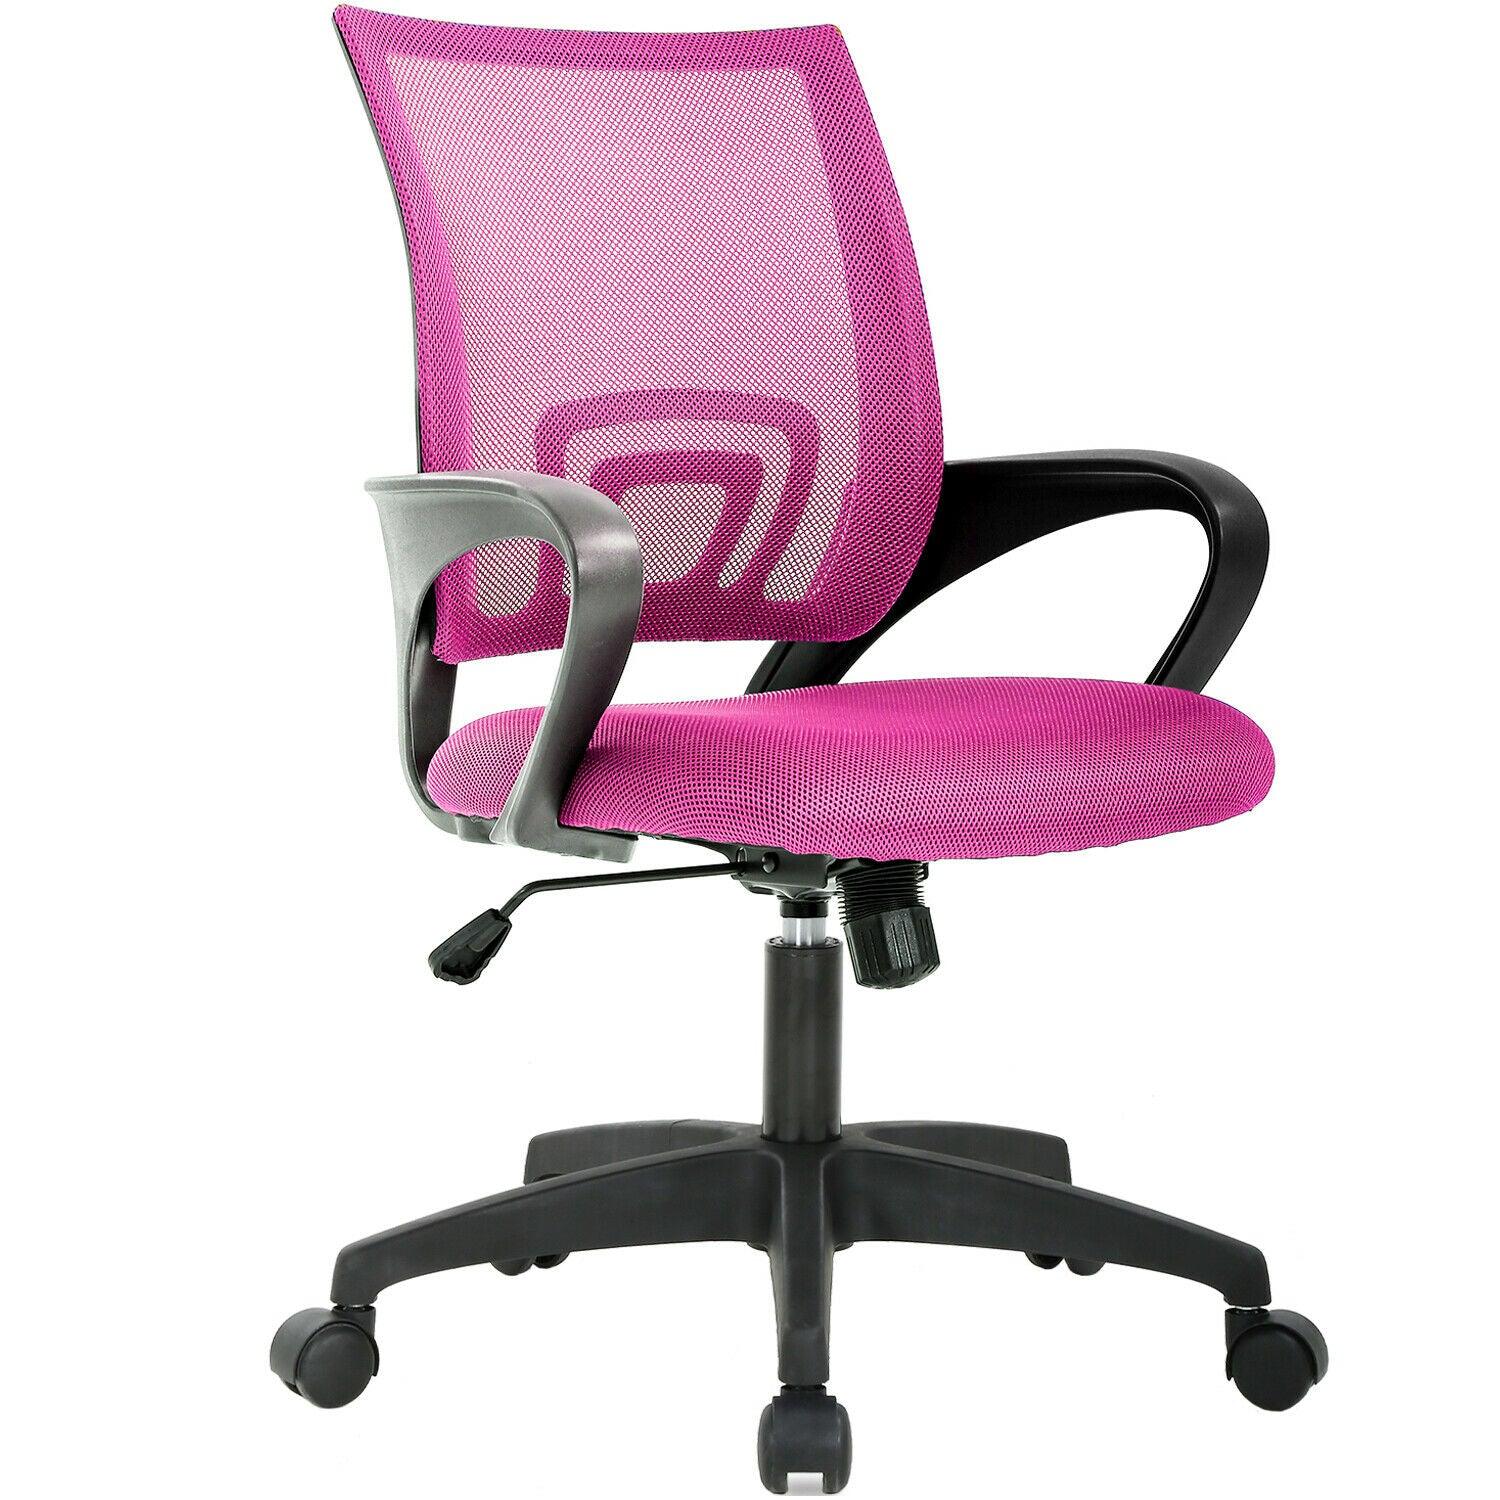 Home Office Chair Ergonomic Desk Chair Mesh Computer Chair - Etyn Online {{ product_tag }}